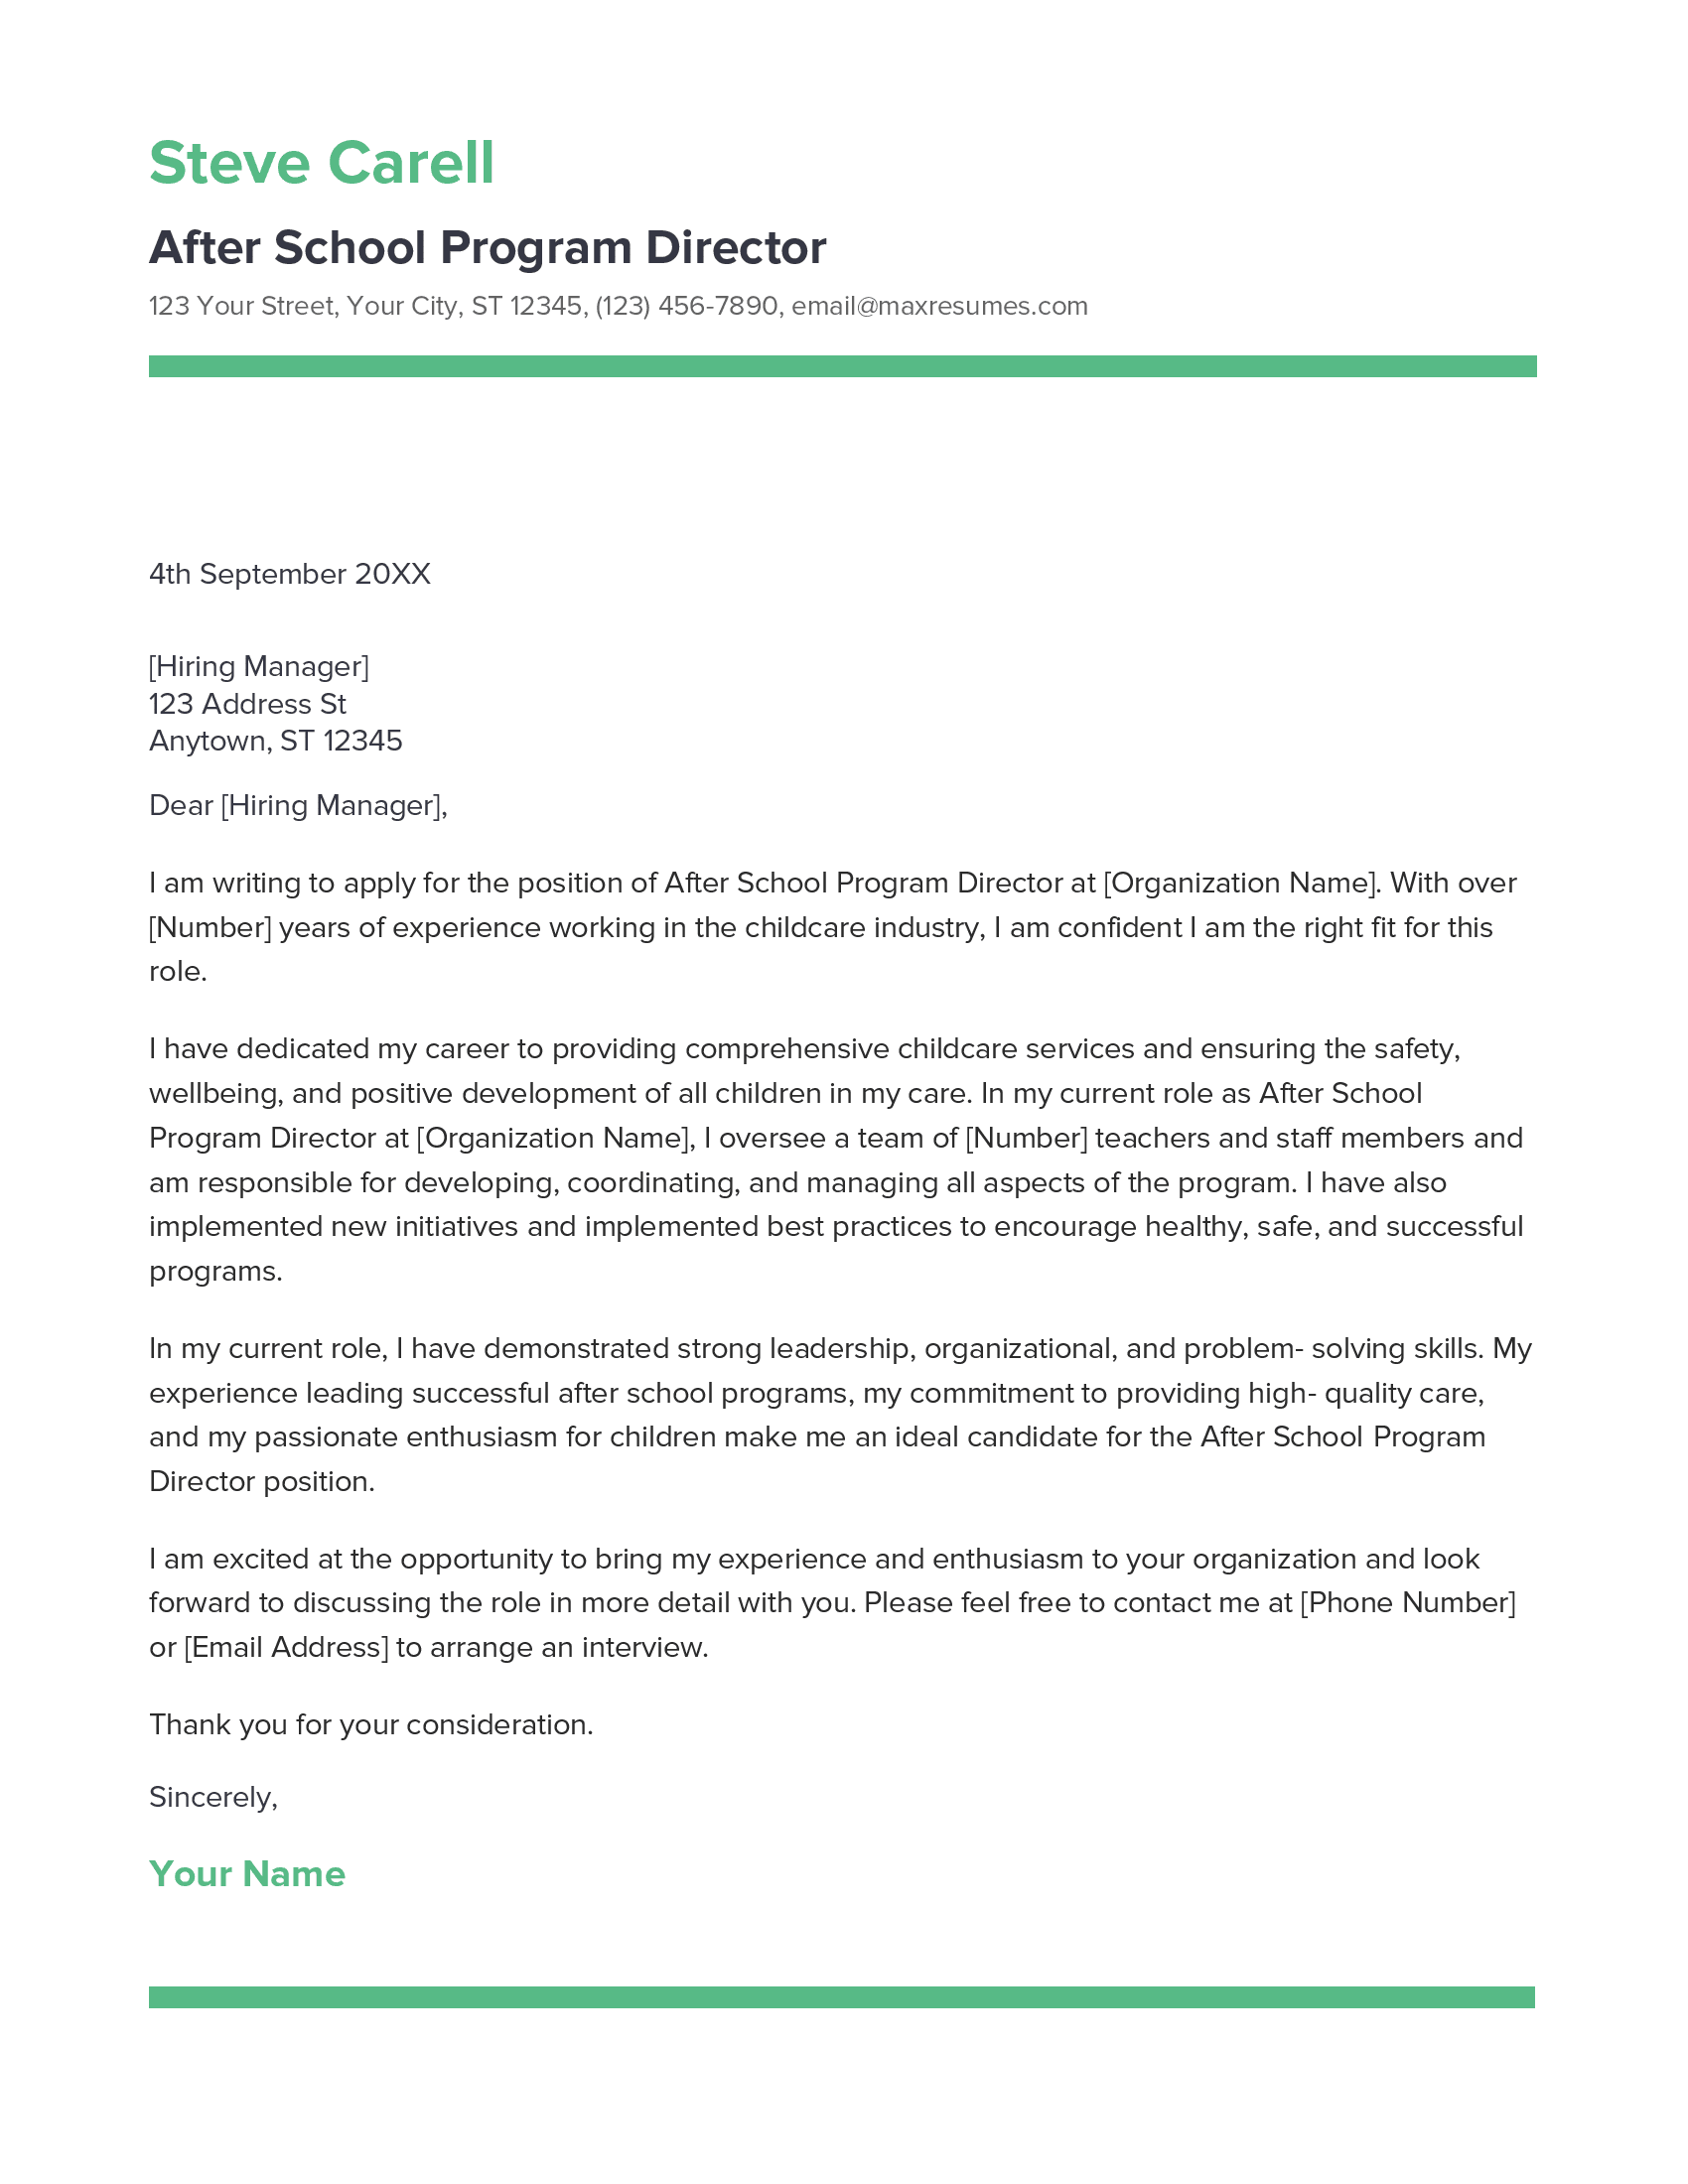 After School Program Director Cover Letter Example